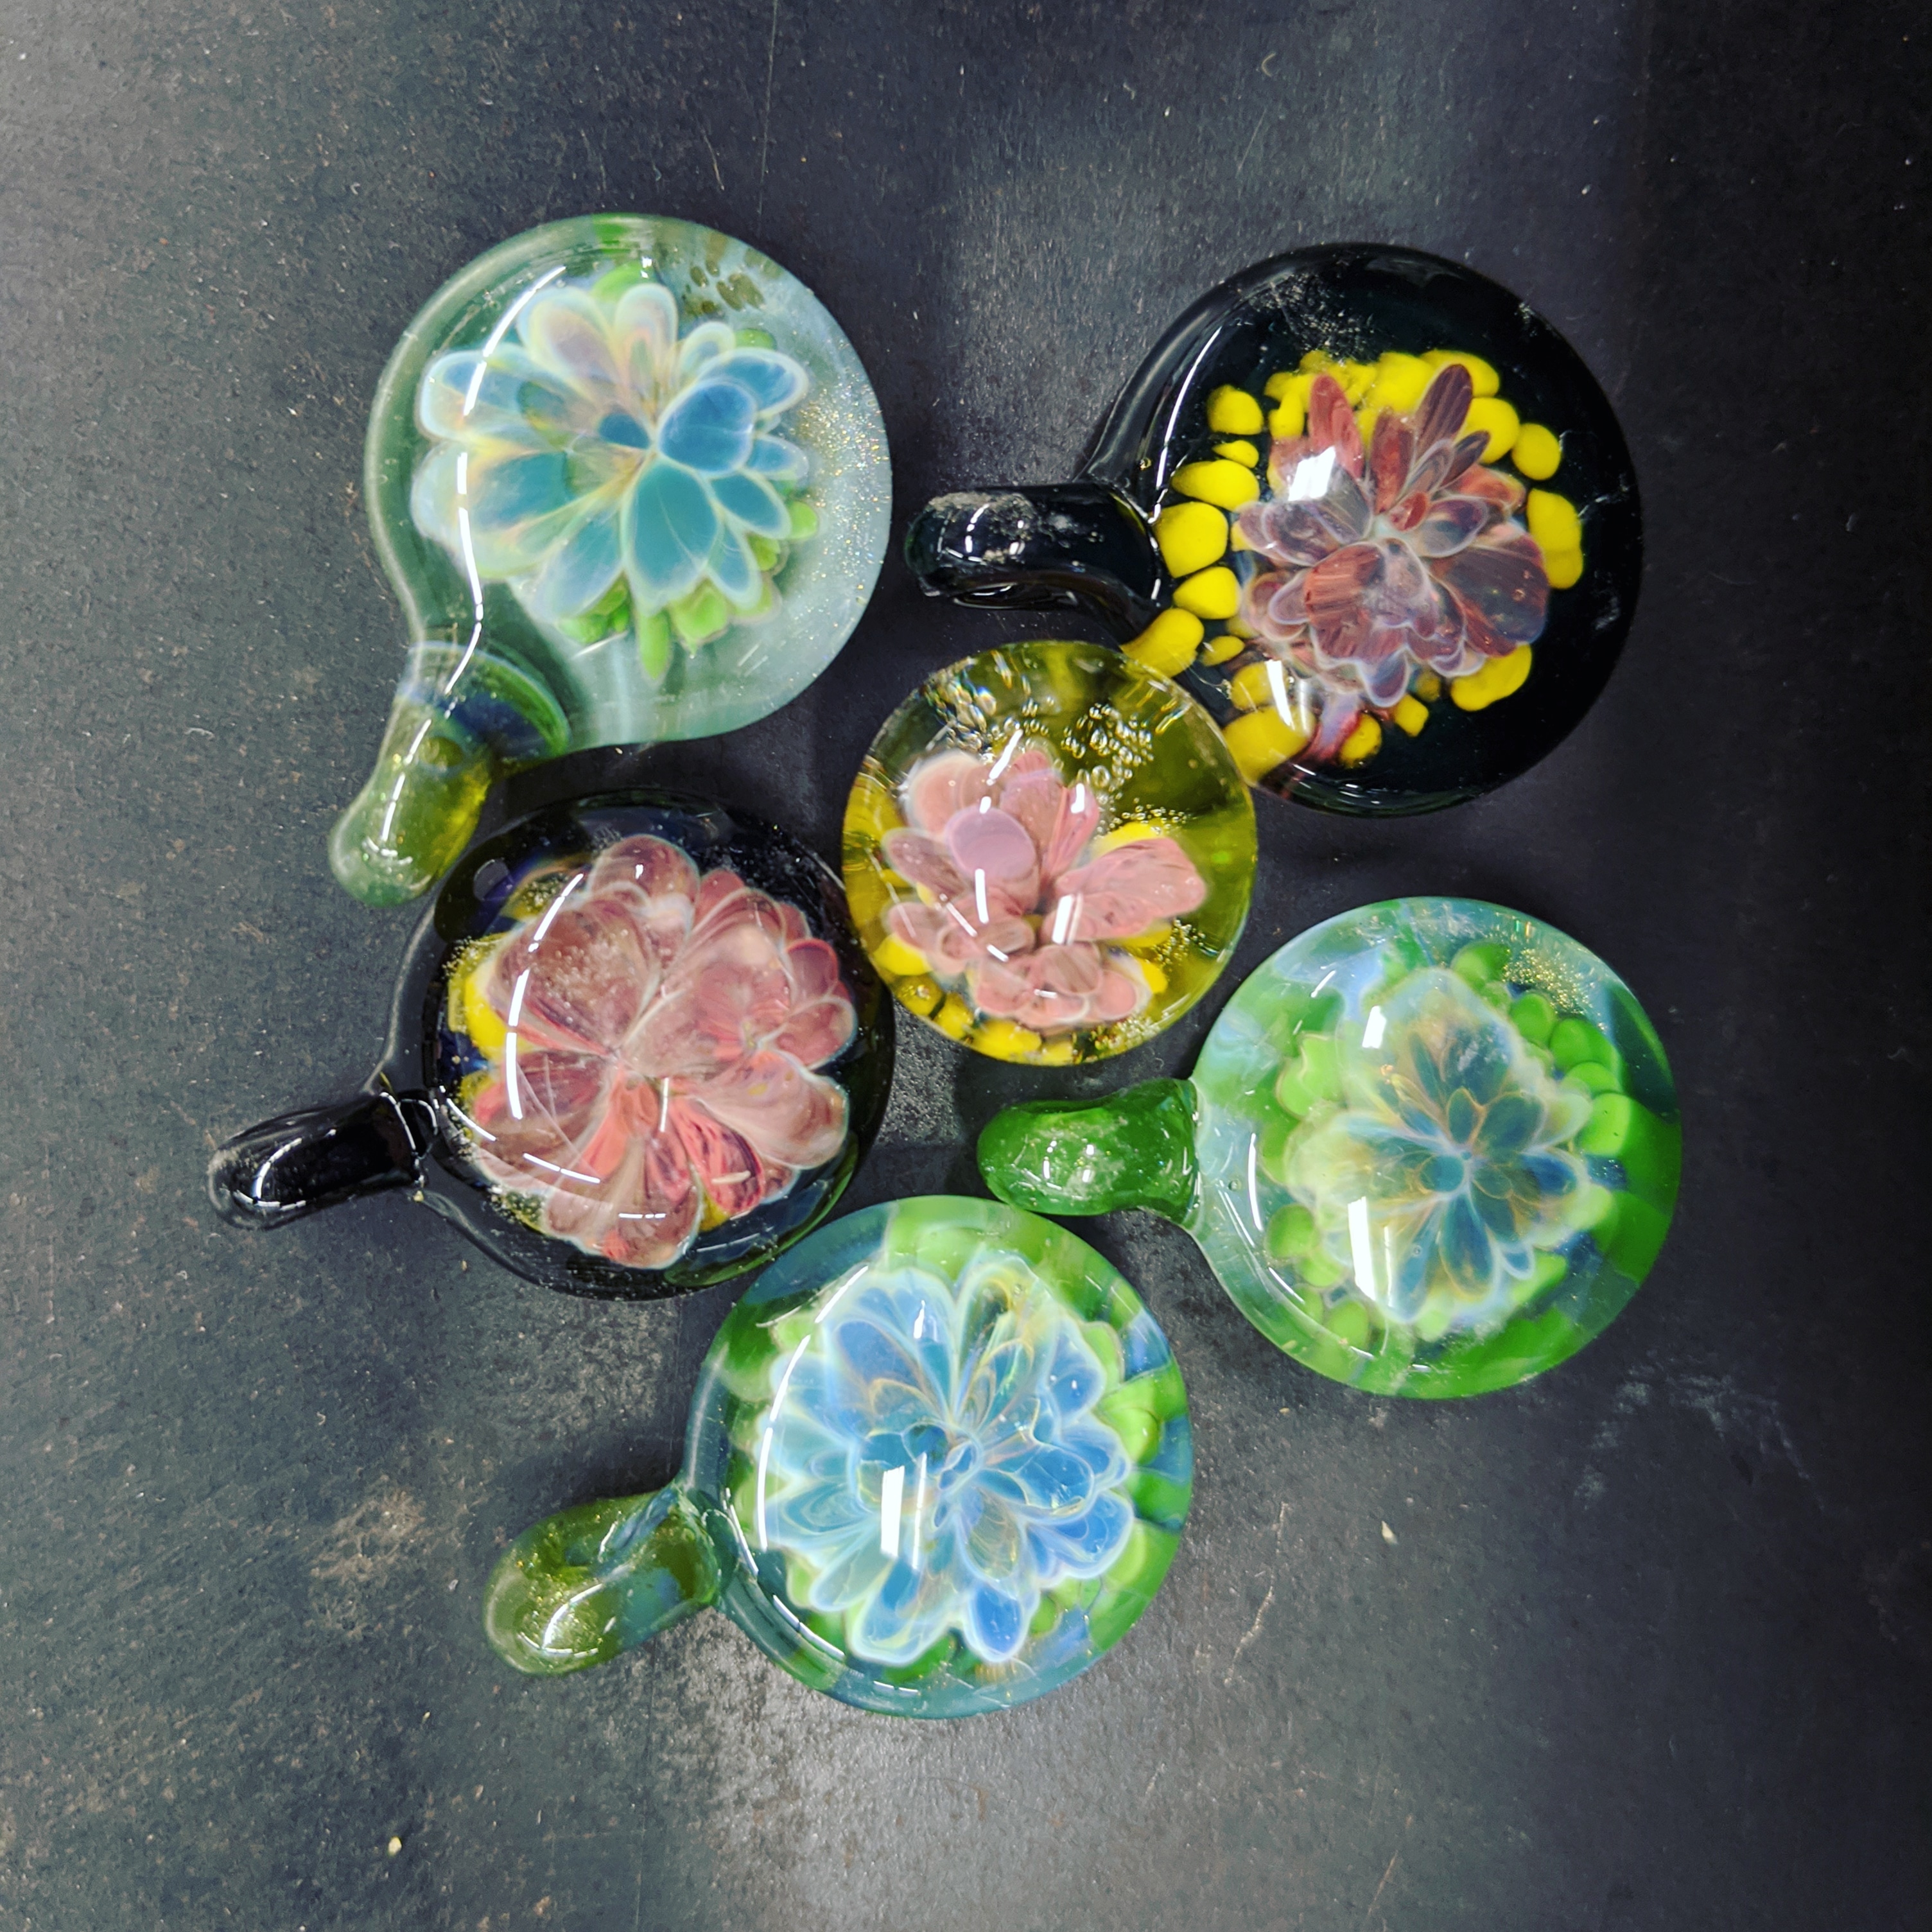 glass pendants with flower designs, waiting for me to make necklaces to display them